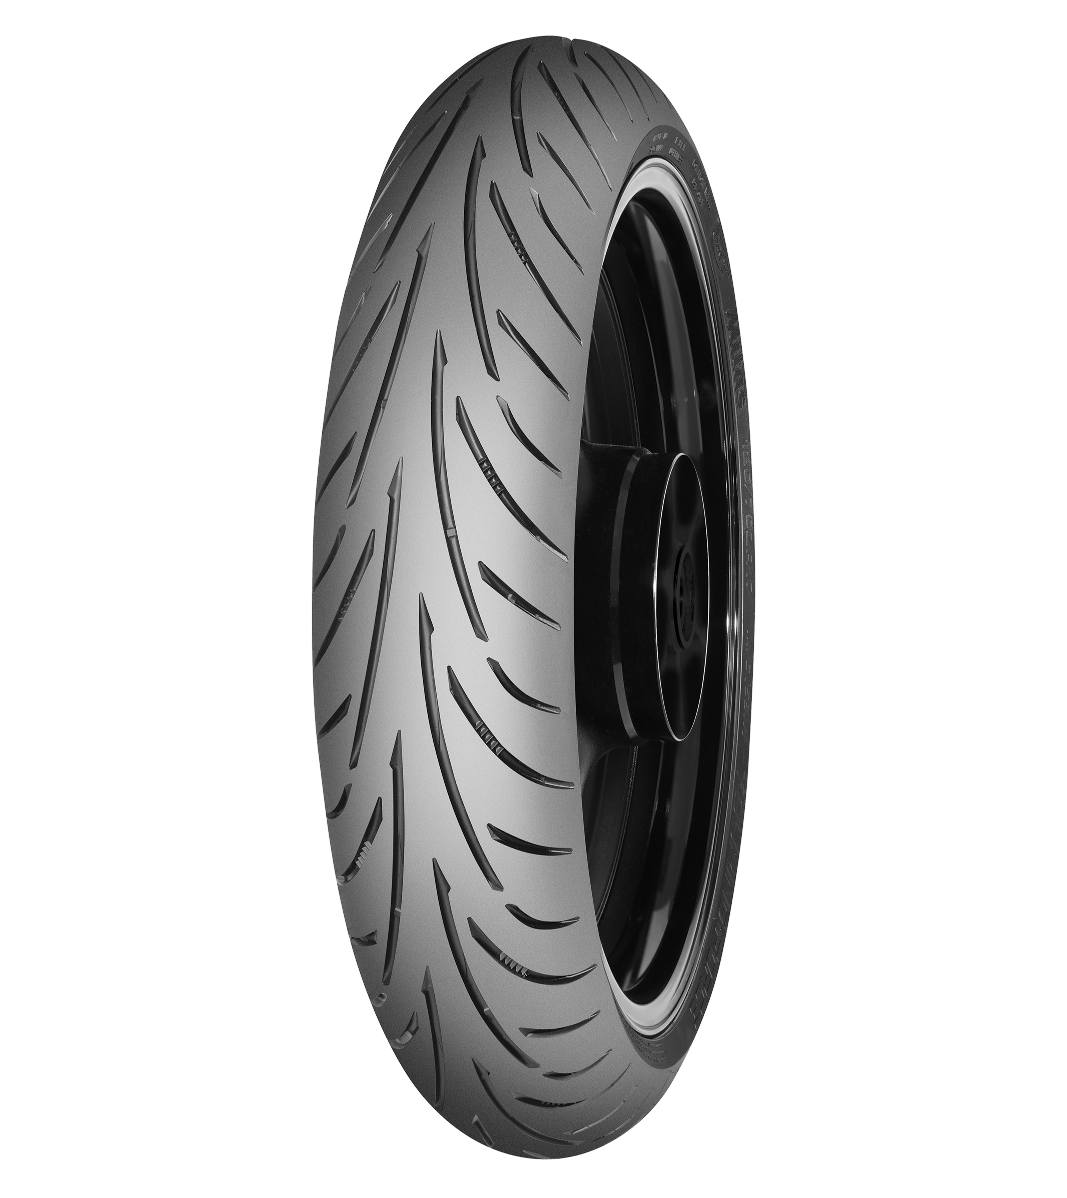 Mitas TOURING FORCE 110/80ZR19 Trail ON Trail (59W) No Stripe Tubeless Front Tire, 608377, 110/80ZR19, Front, Touring-Force, Trail, Trail ON, Tires - Imported and distributed in North &amp; South America by Lindeco Genuine Powersports - Premier Powersports Equipment and Accessories for Motorcycle Enthusiasts, Professional Riders and Dealers.